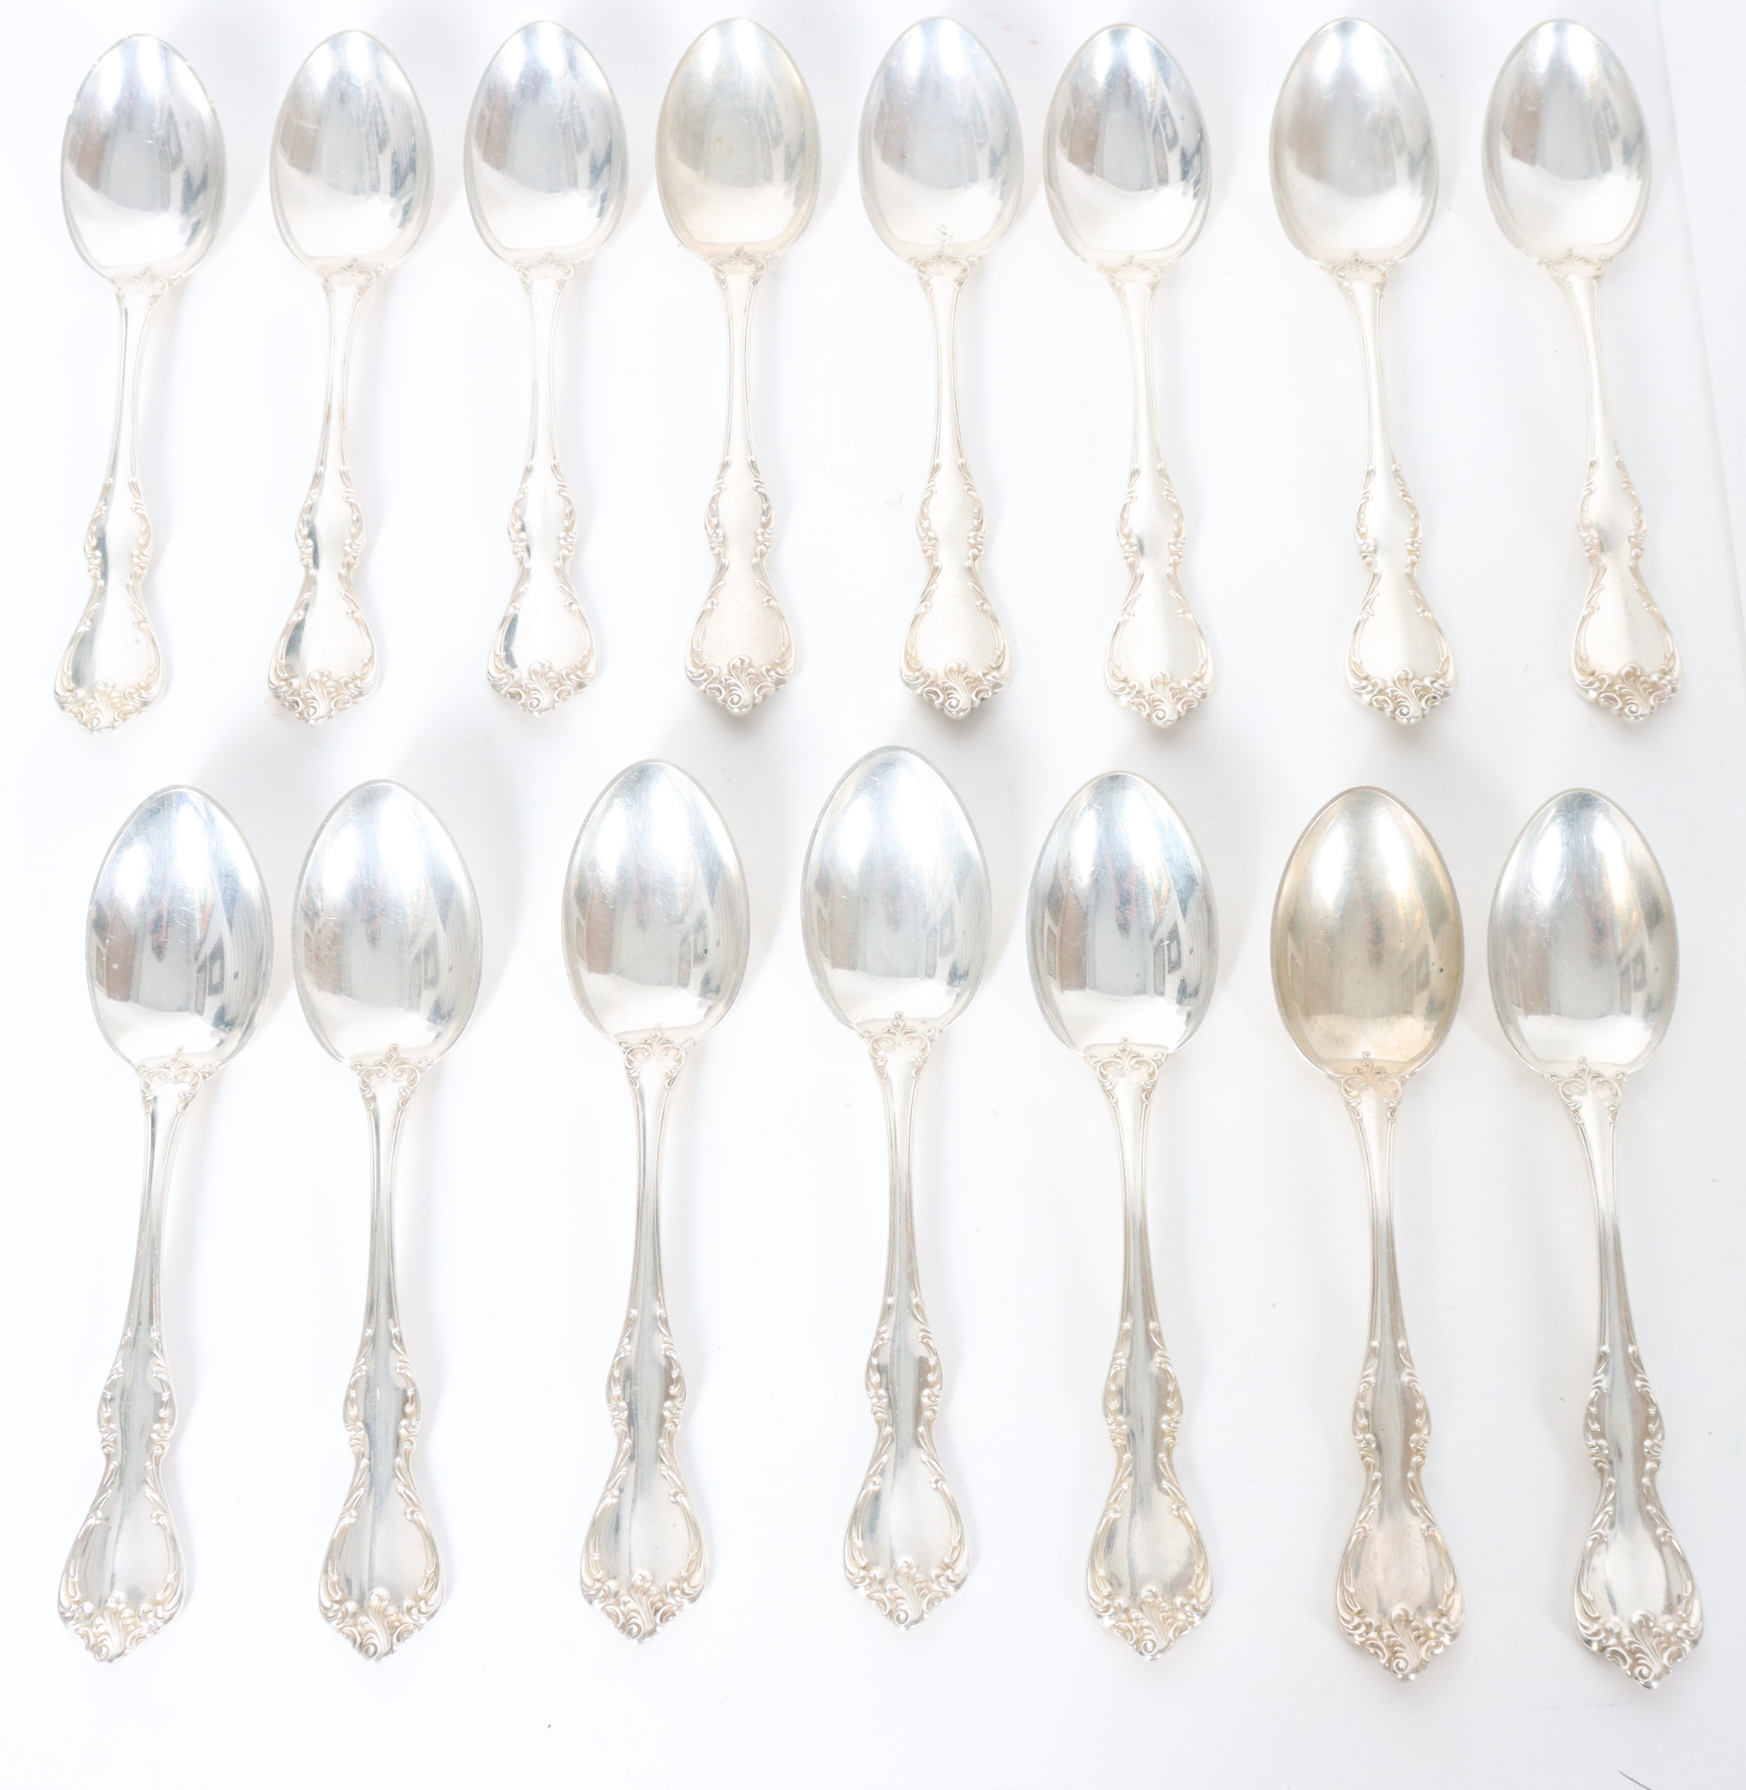 (51) Pc 1959 Towle Sterling Silverware Set, 81 OZT - Image 4 of 11